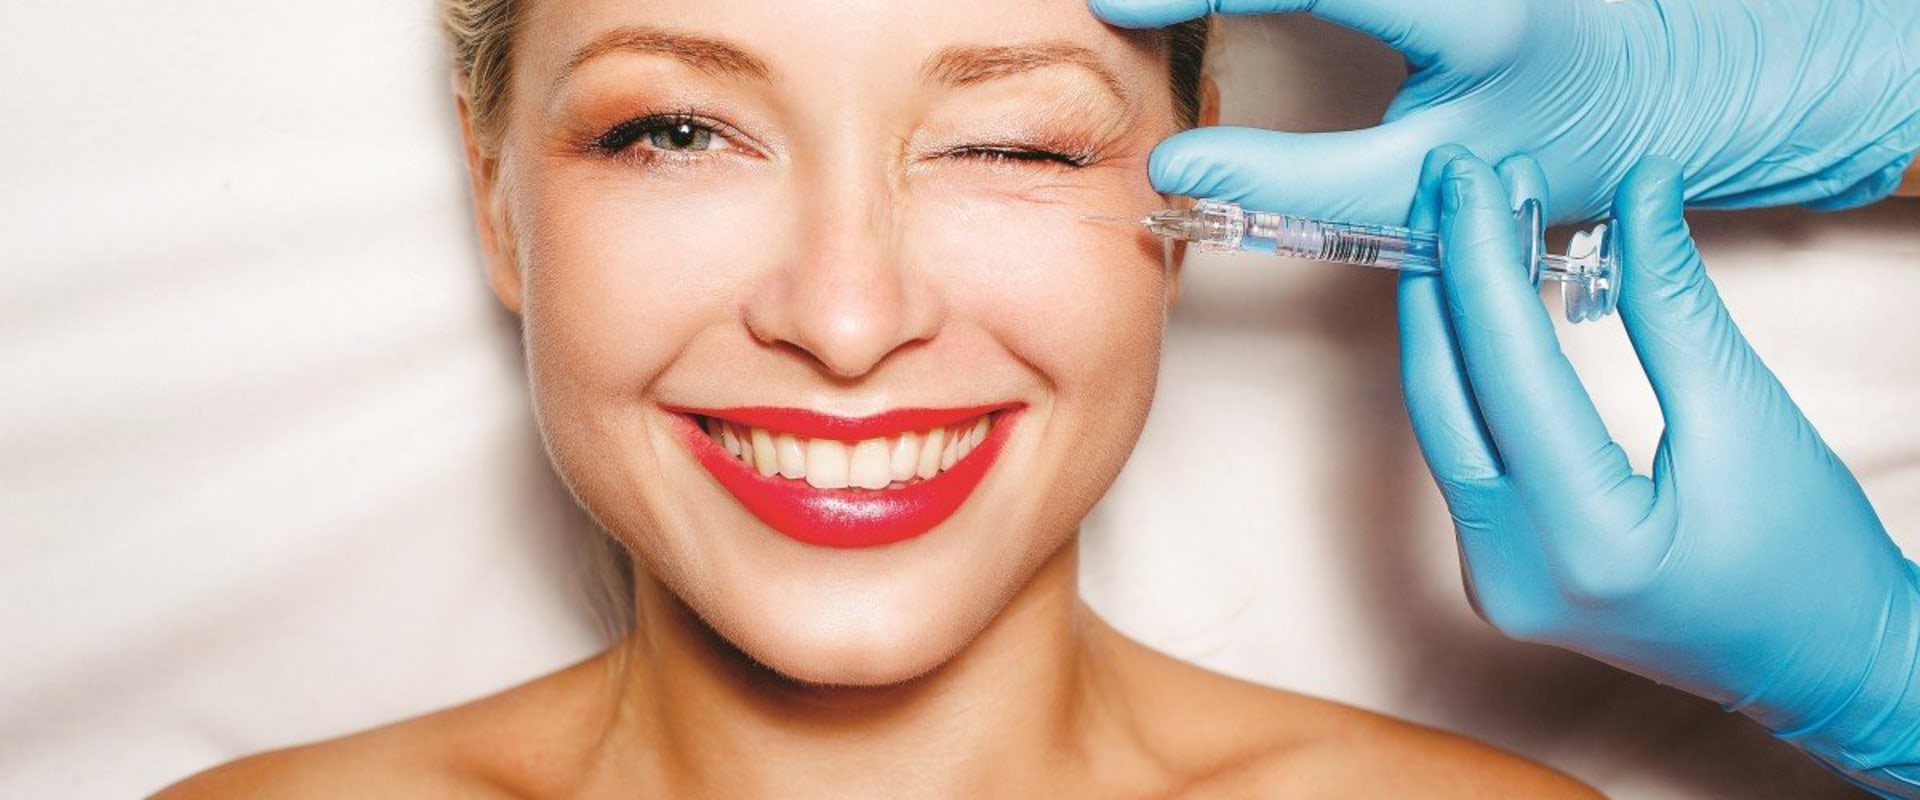 The Benefits of Cosmetic Surgery: Why It Can Make You Feel Happier